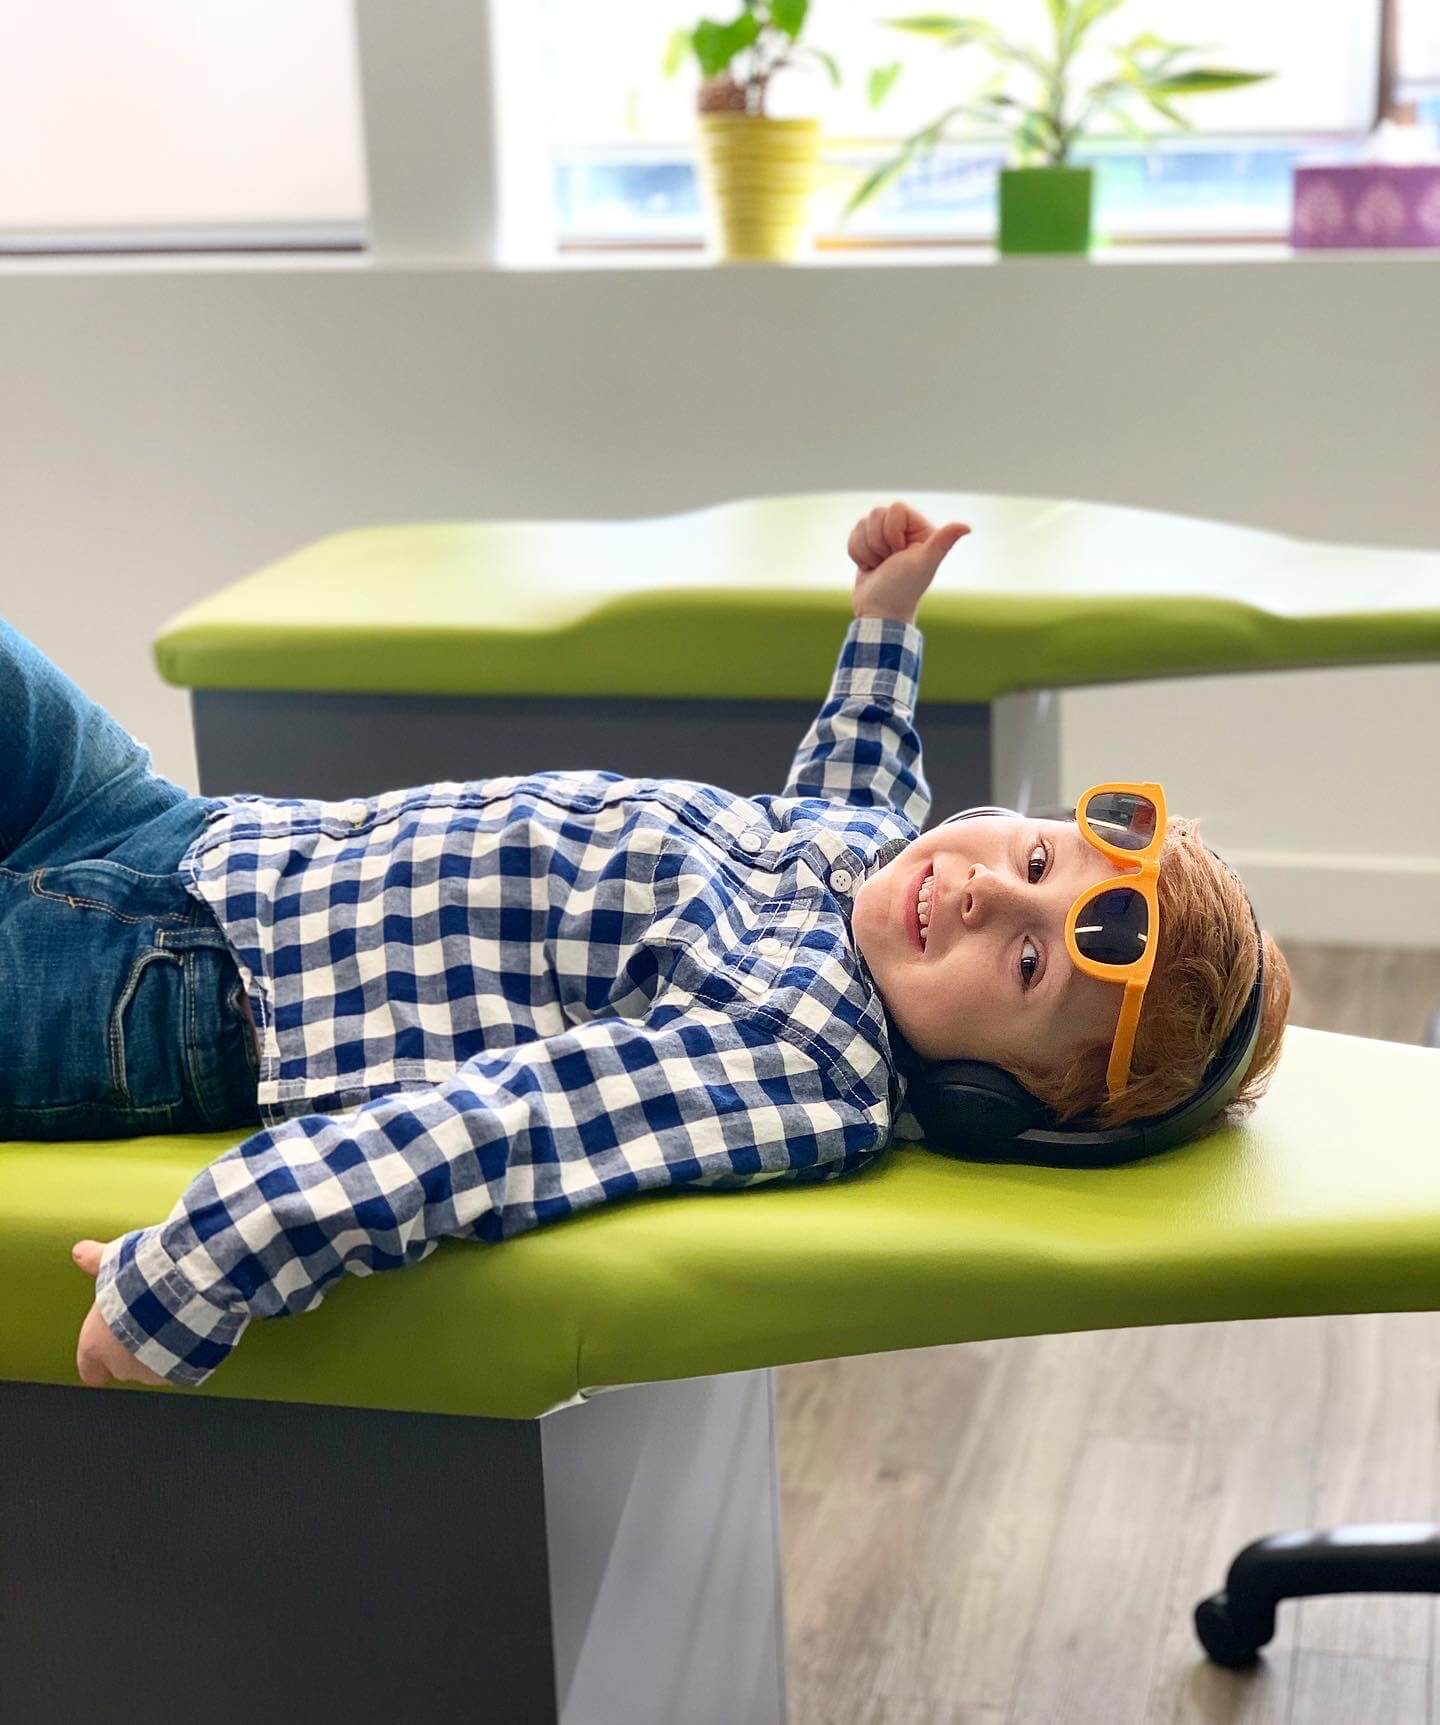 A young boy smiling, giving a thumbs up while lying on a patient's chair.